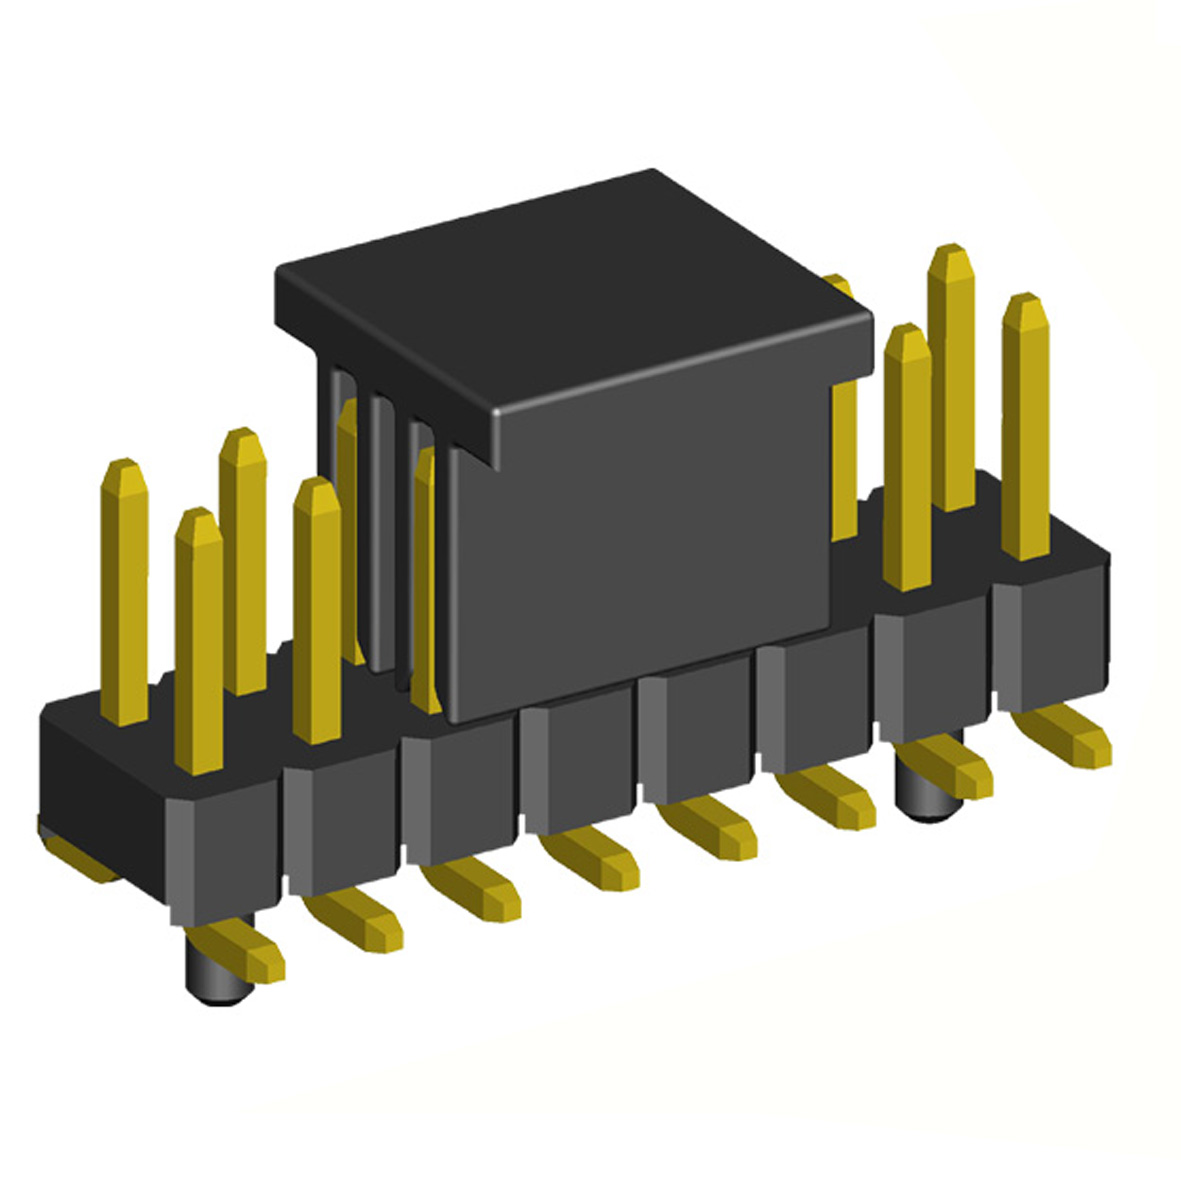 2208SM-XXG-XXXX-CG series, plugs pin open straight two-row with guides on the Board for surface (SMD) mounting with capture, pitch 2,0x2,0 mm, 2x40 pins